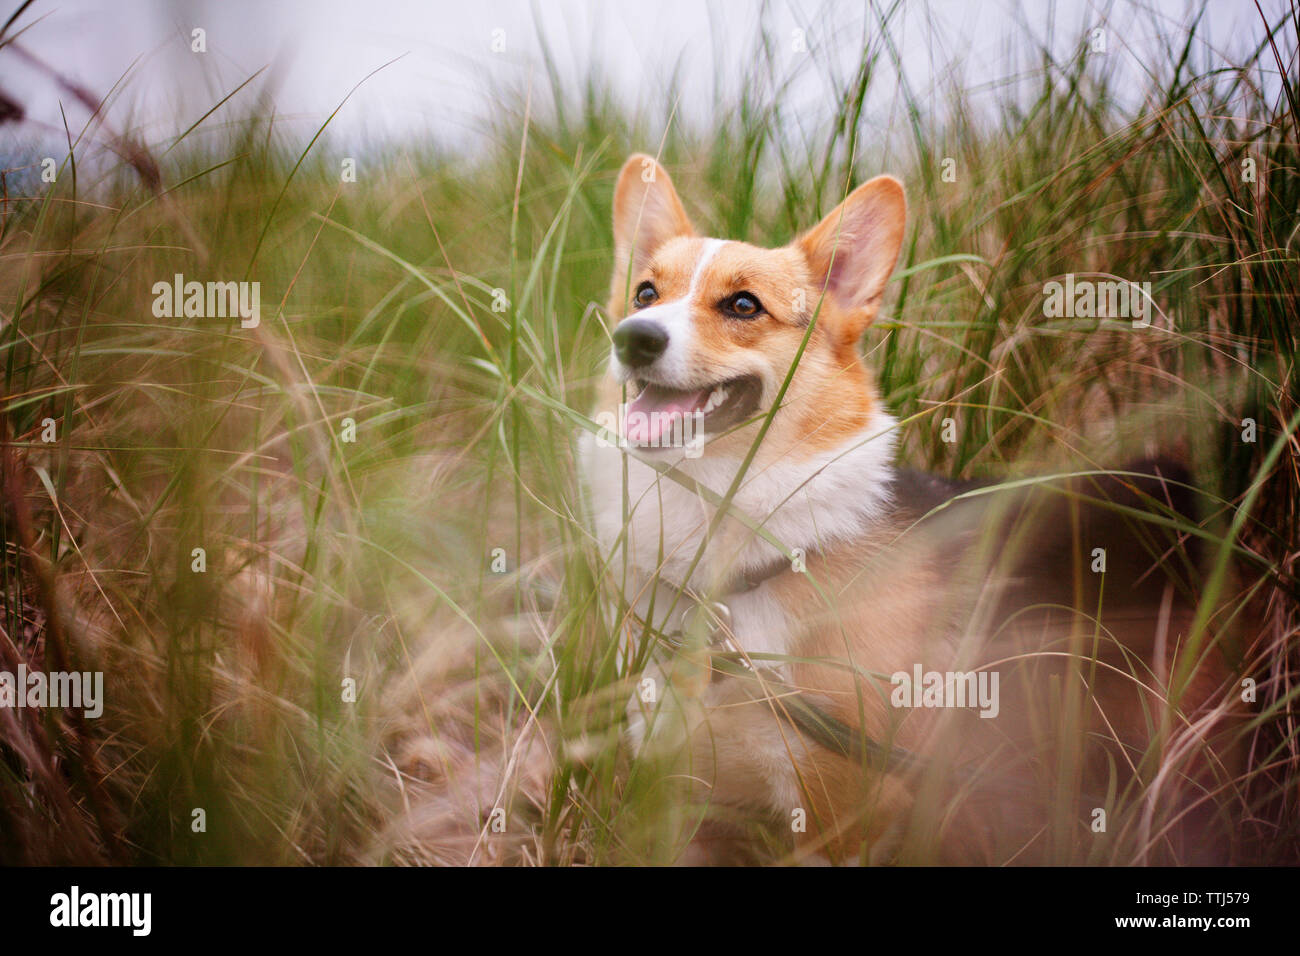 Corgi dog standing in grassy field Banque D'Images